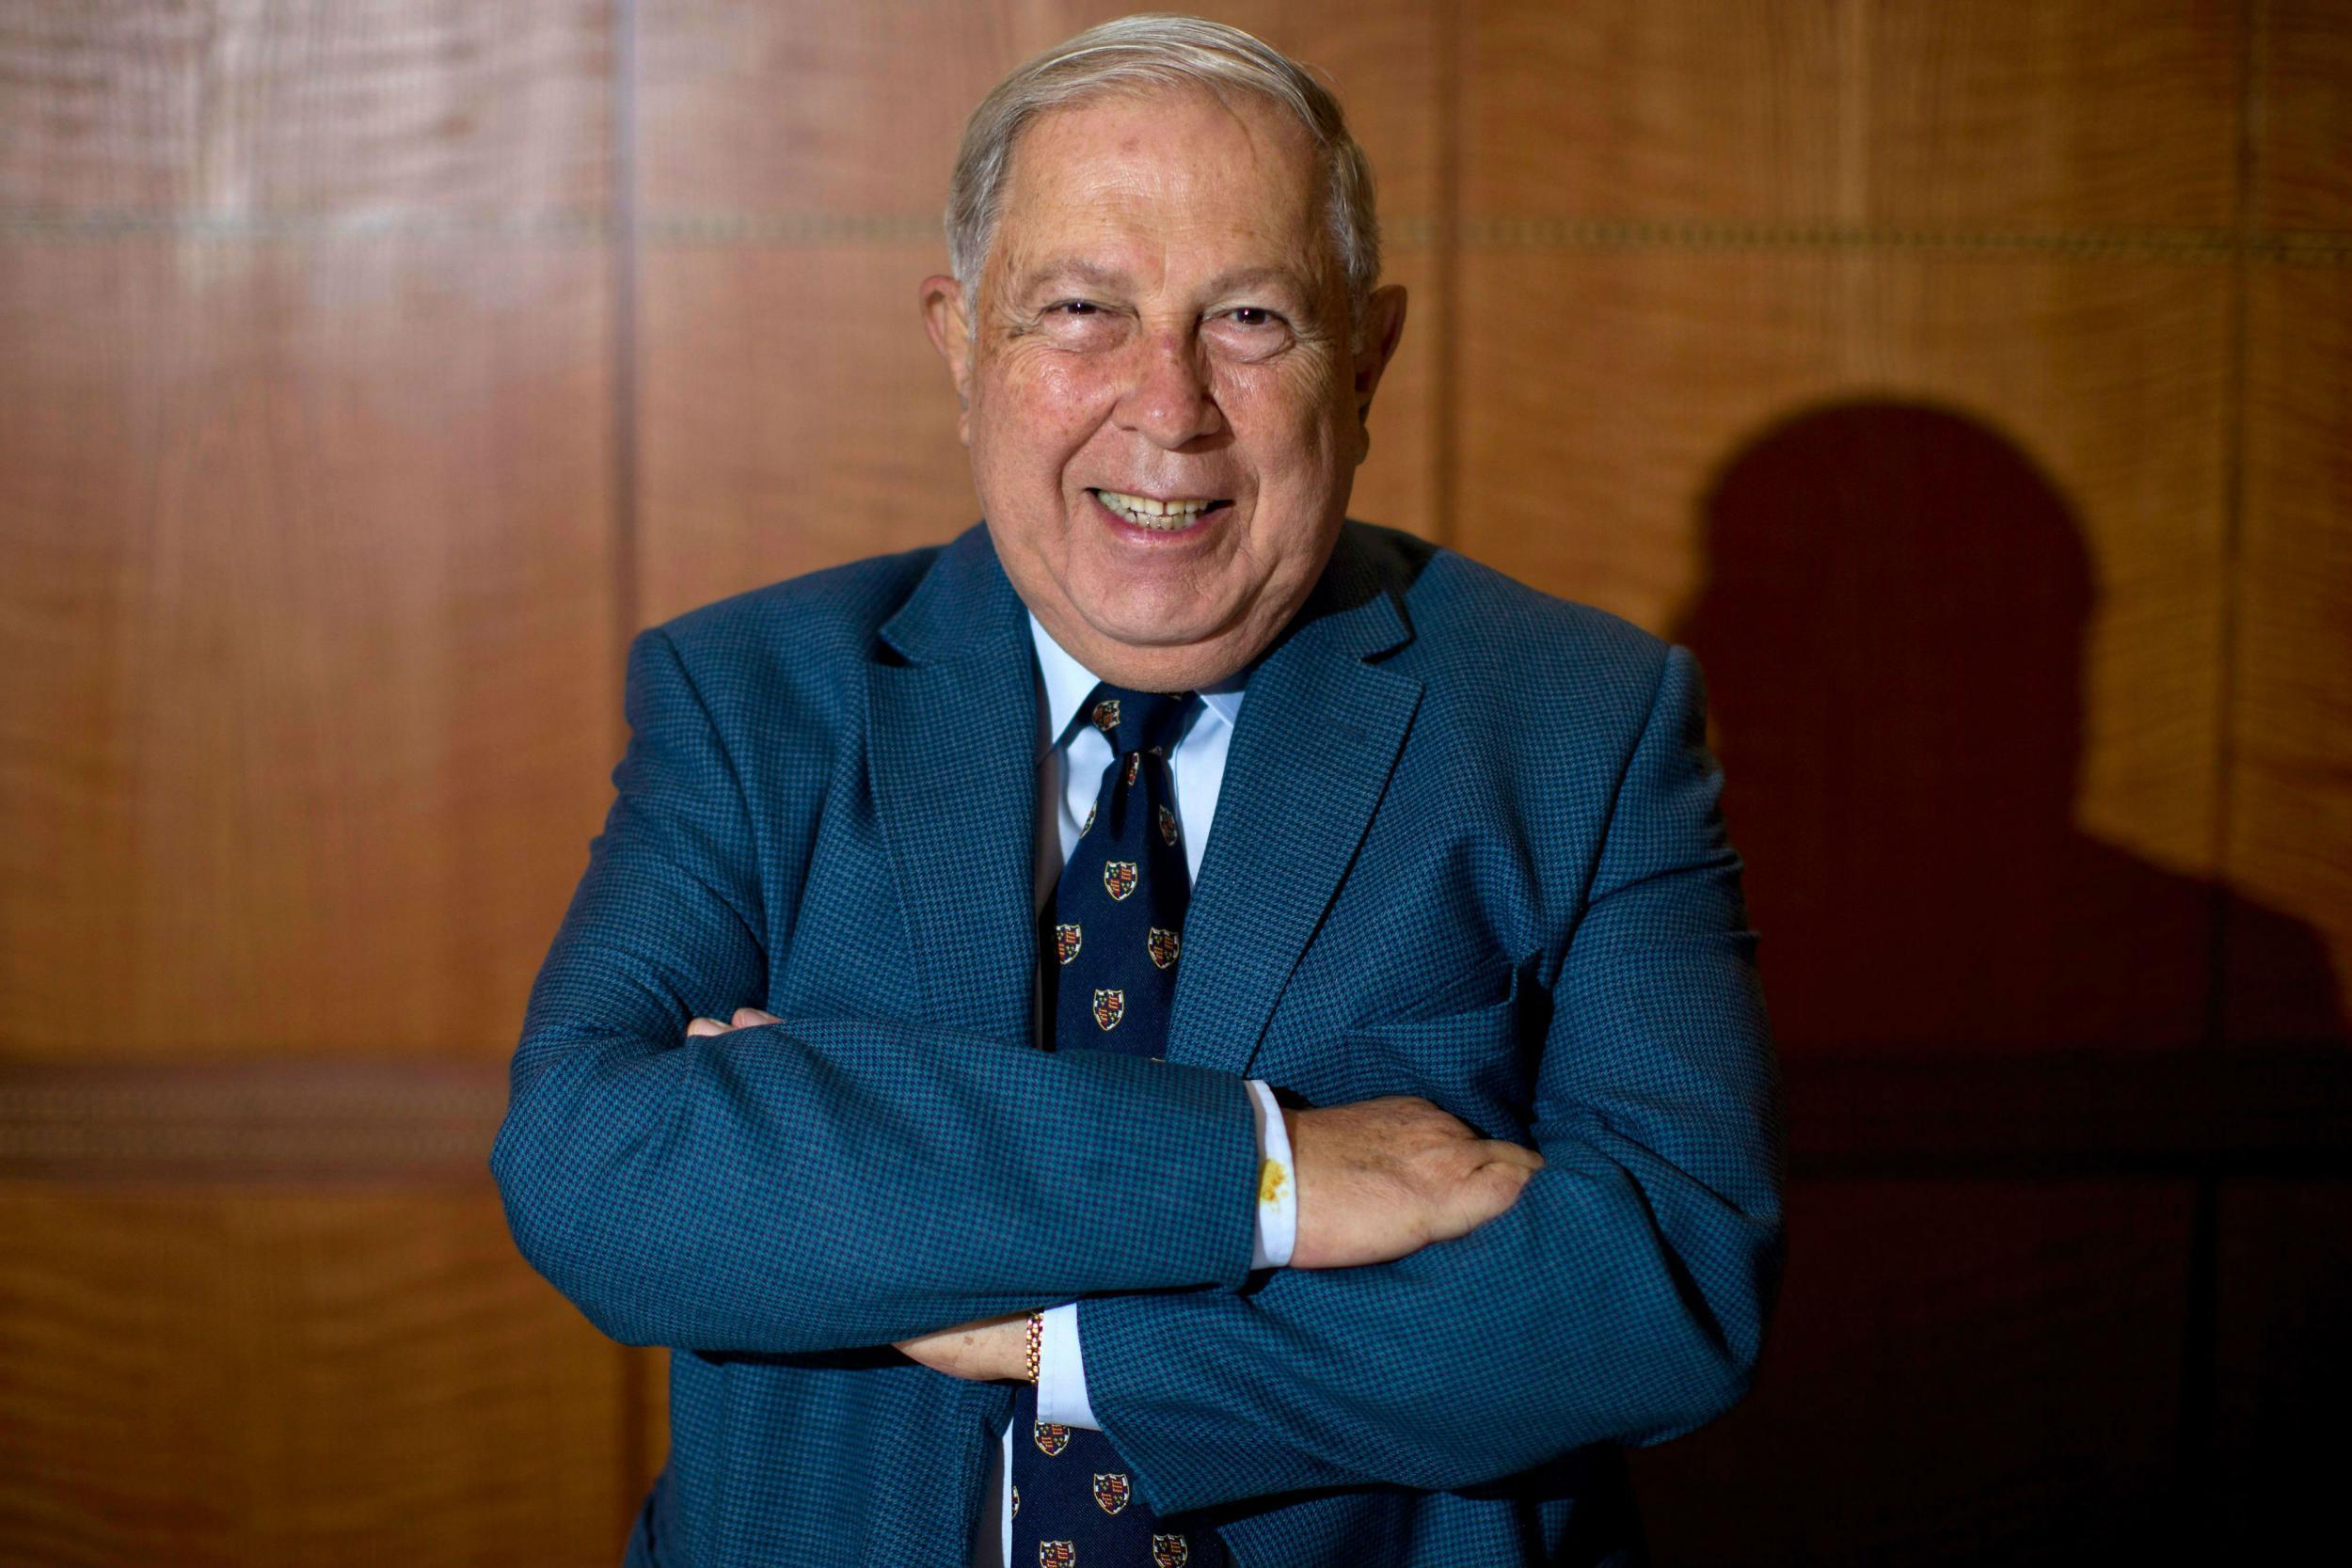 Yusuf Hamied is the chairman of Cipla